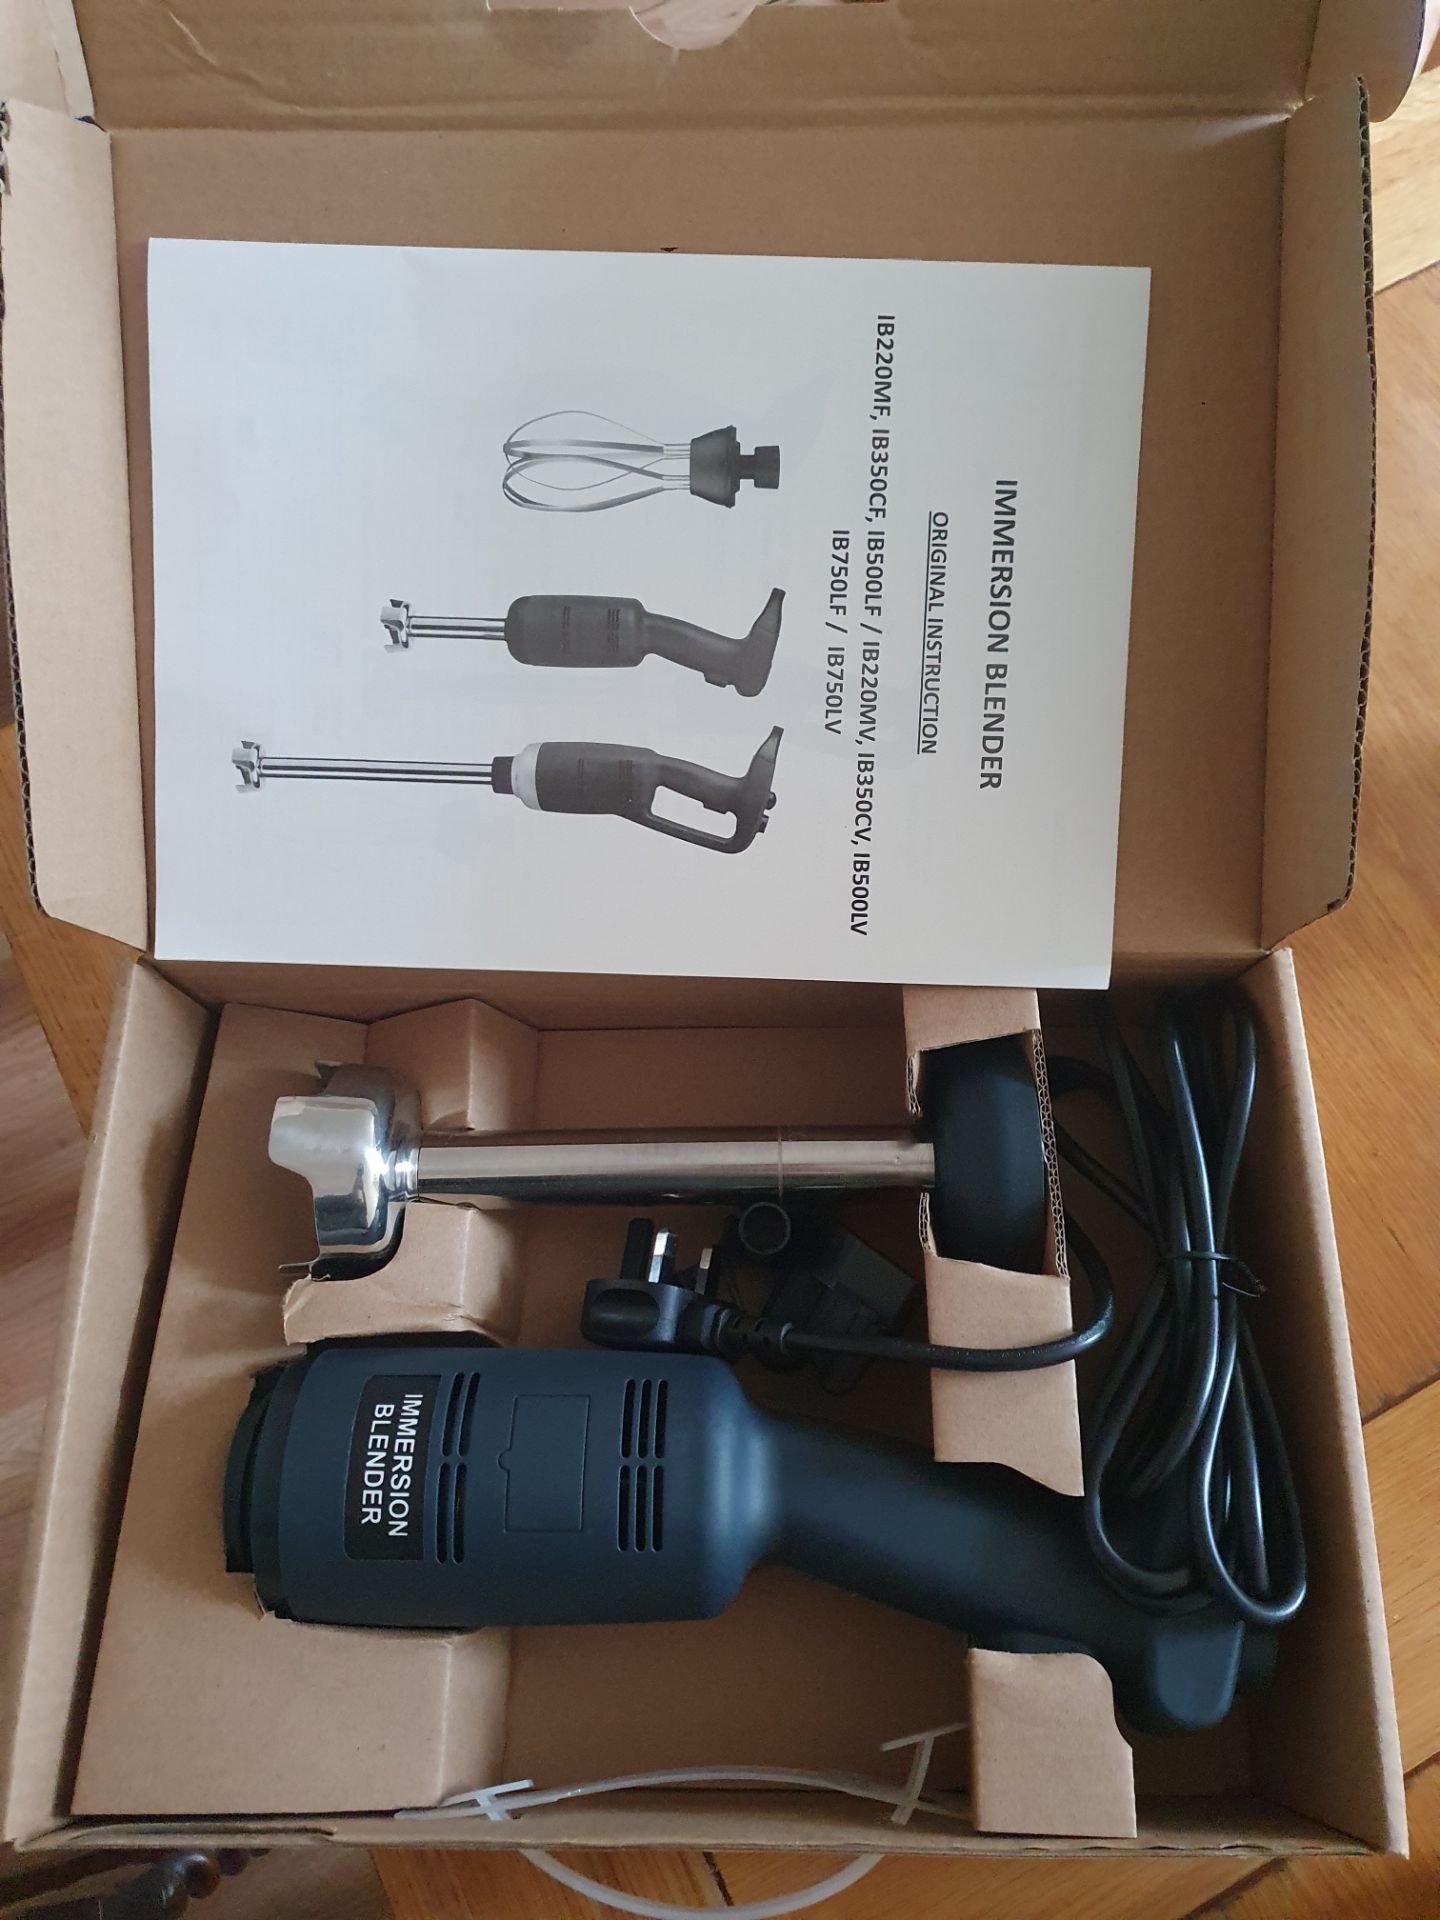 Immersion Blender With Interchangeable Blades - Image 3 of 5